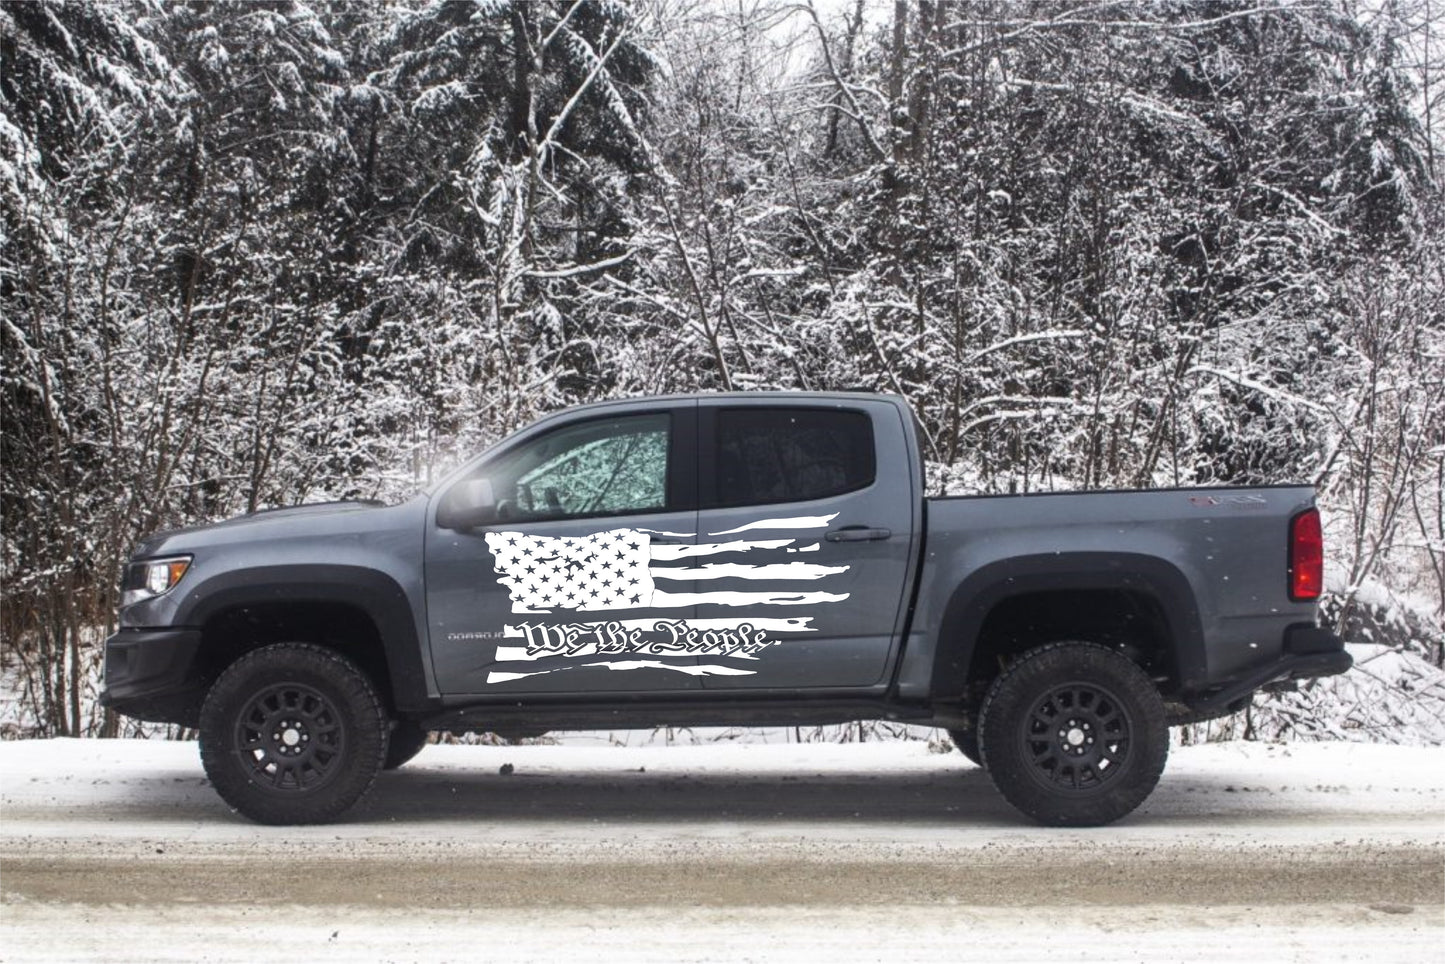 Distressed American Flag Decal Fits Jeeps, Trucks, SUVs, Cars. Sizes Available.